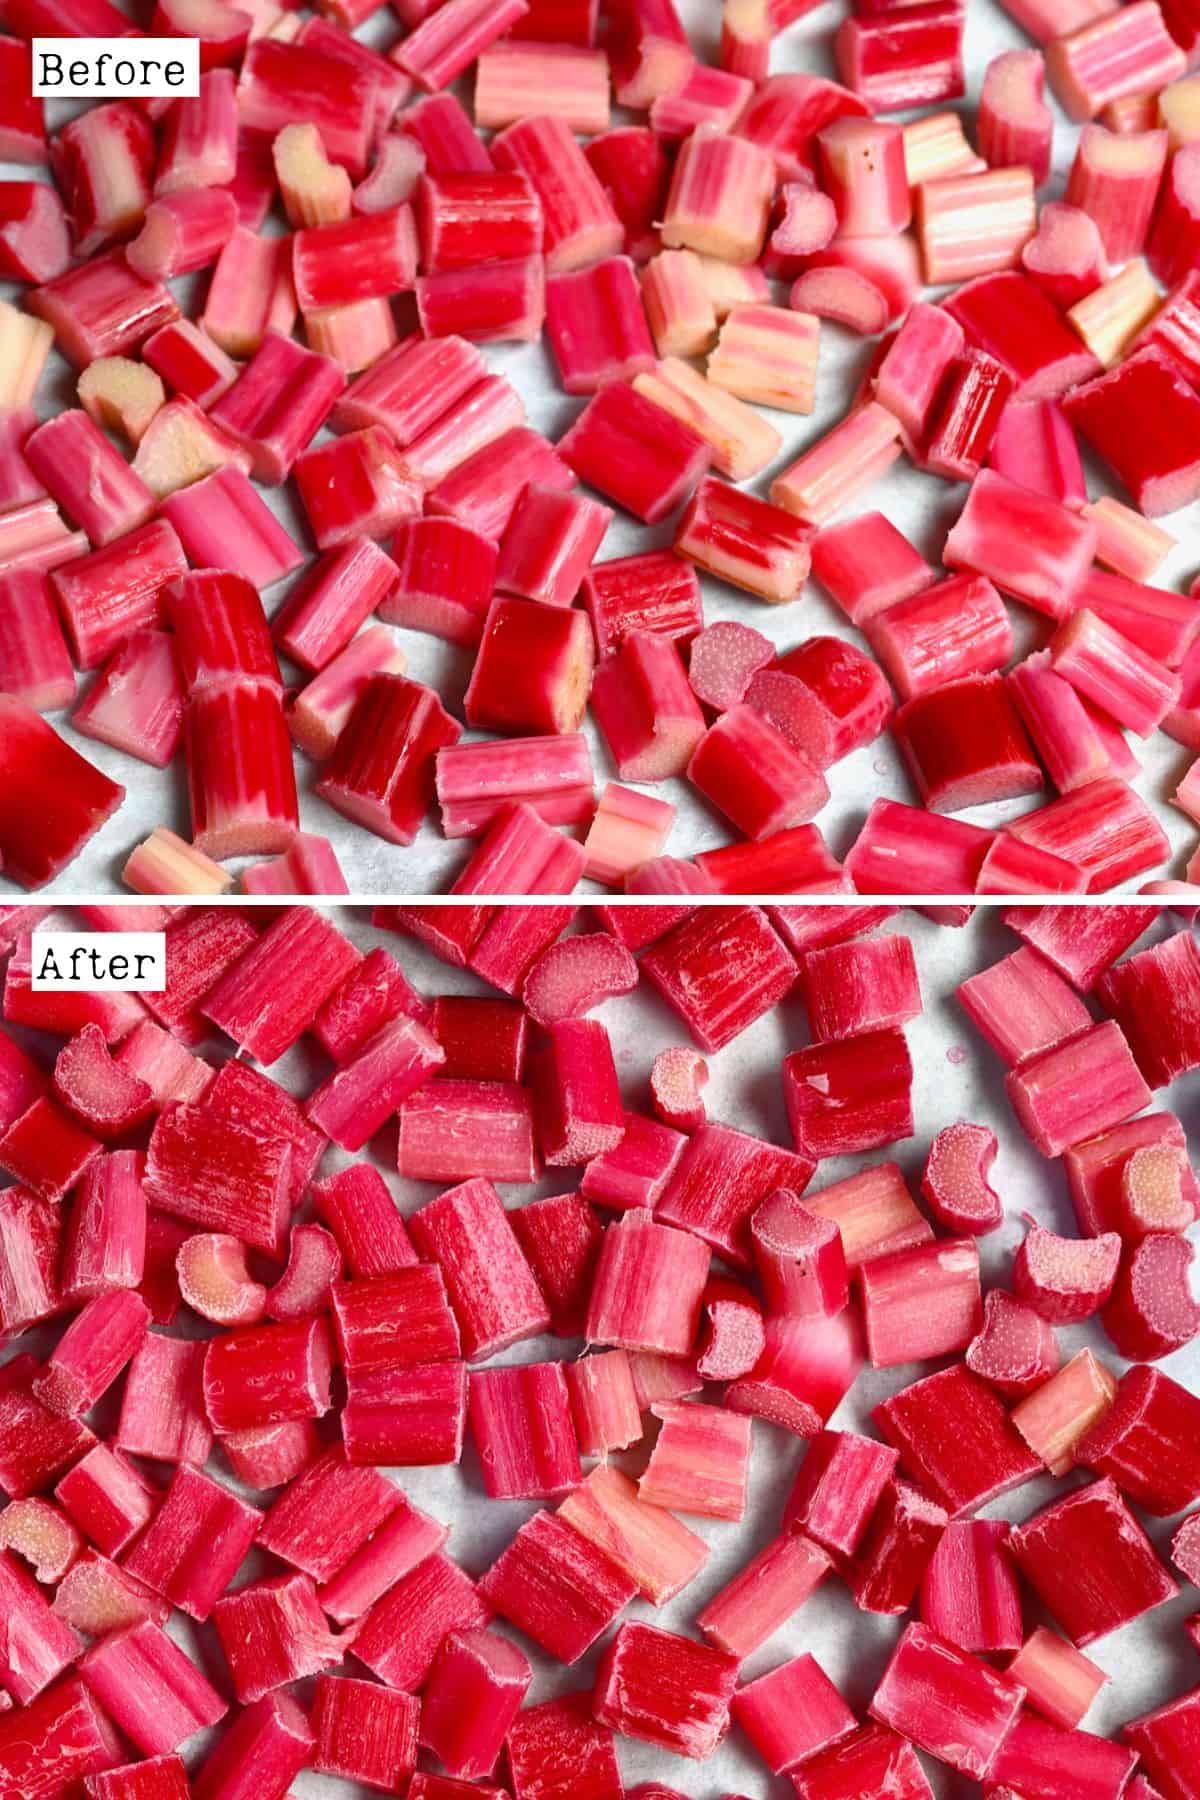 Before and after flash-freezing rhubarb